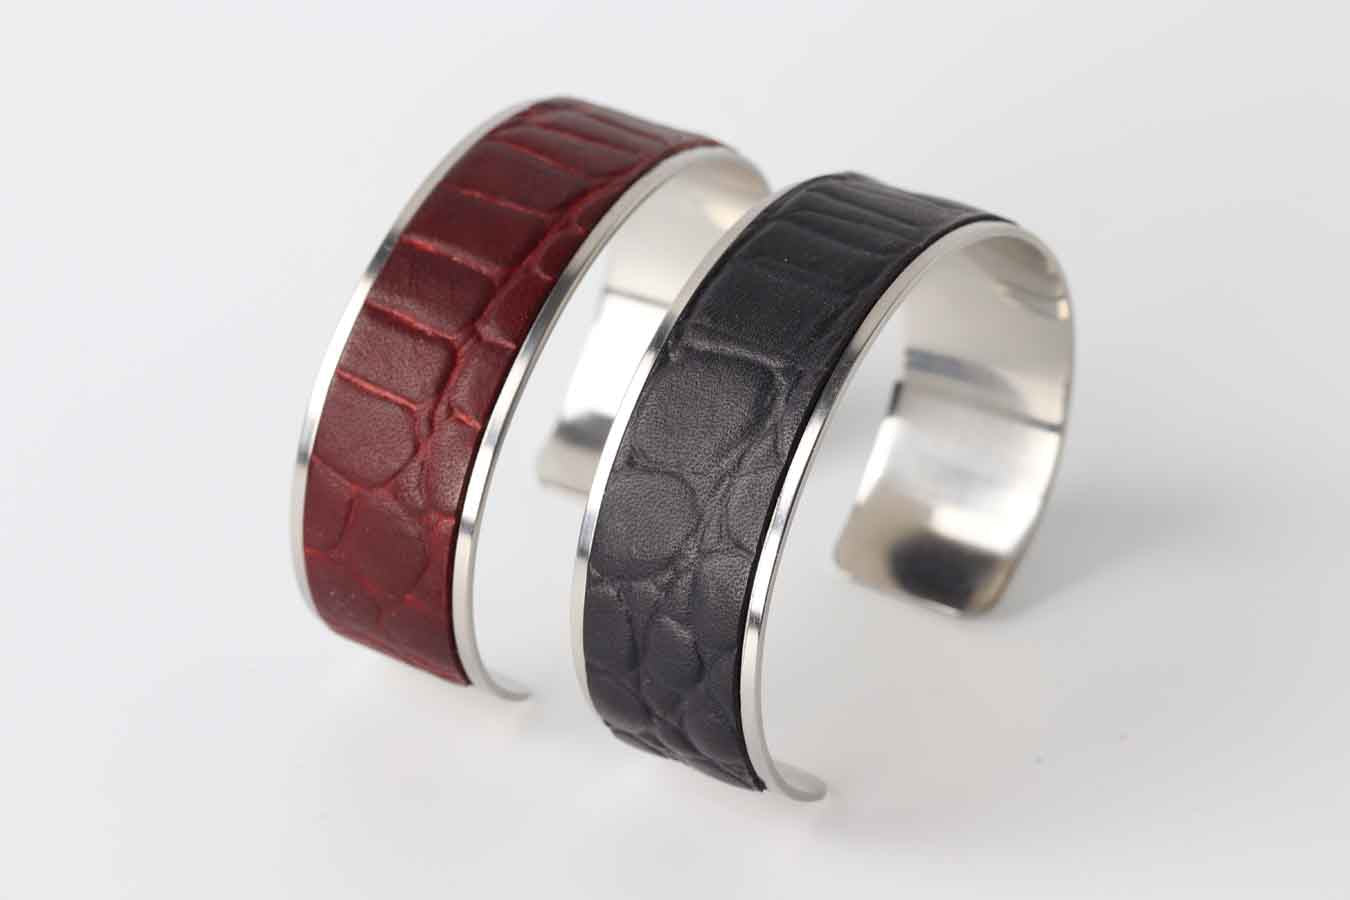 Cuff Bracelets with leather made from stainless steel with silver shine made by Kaseta